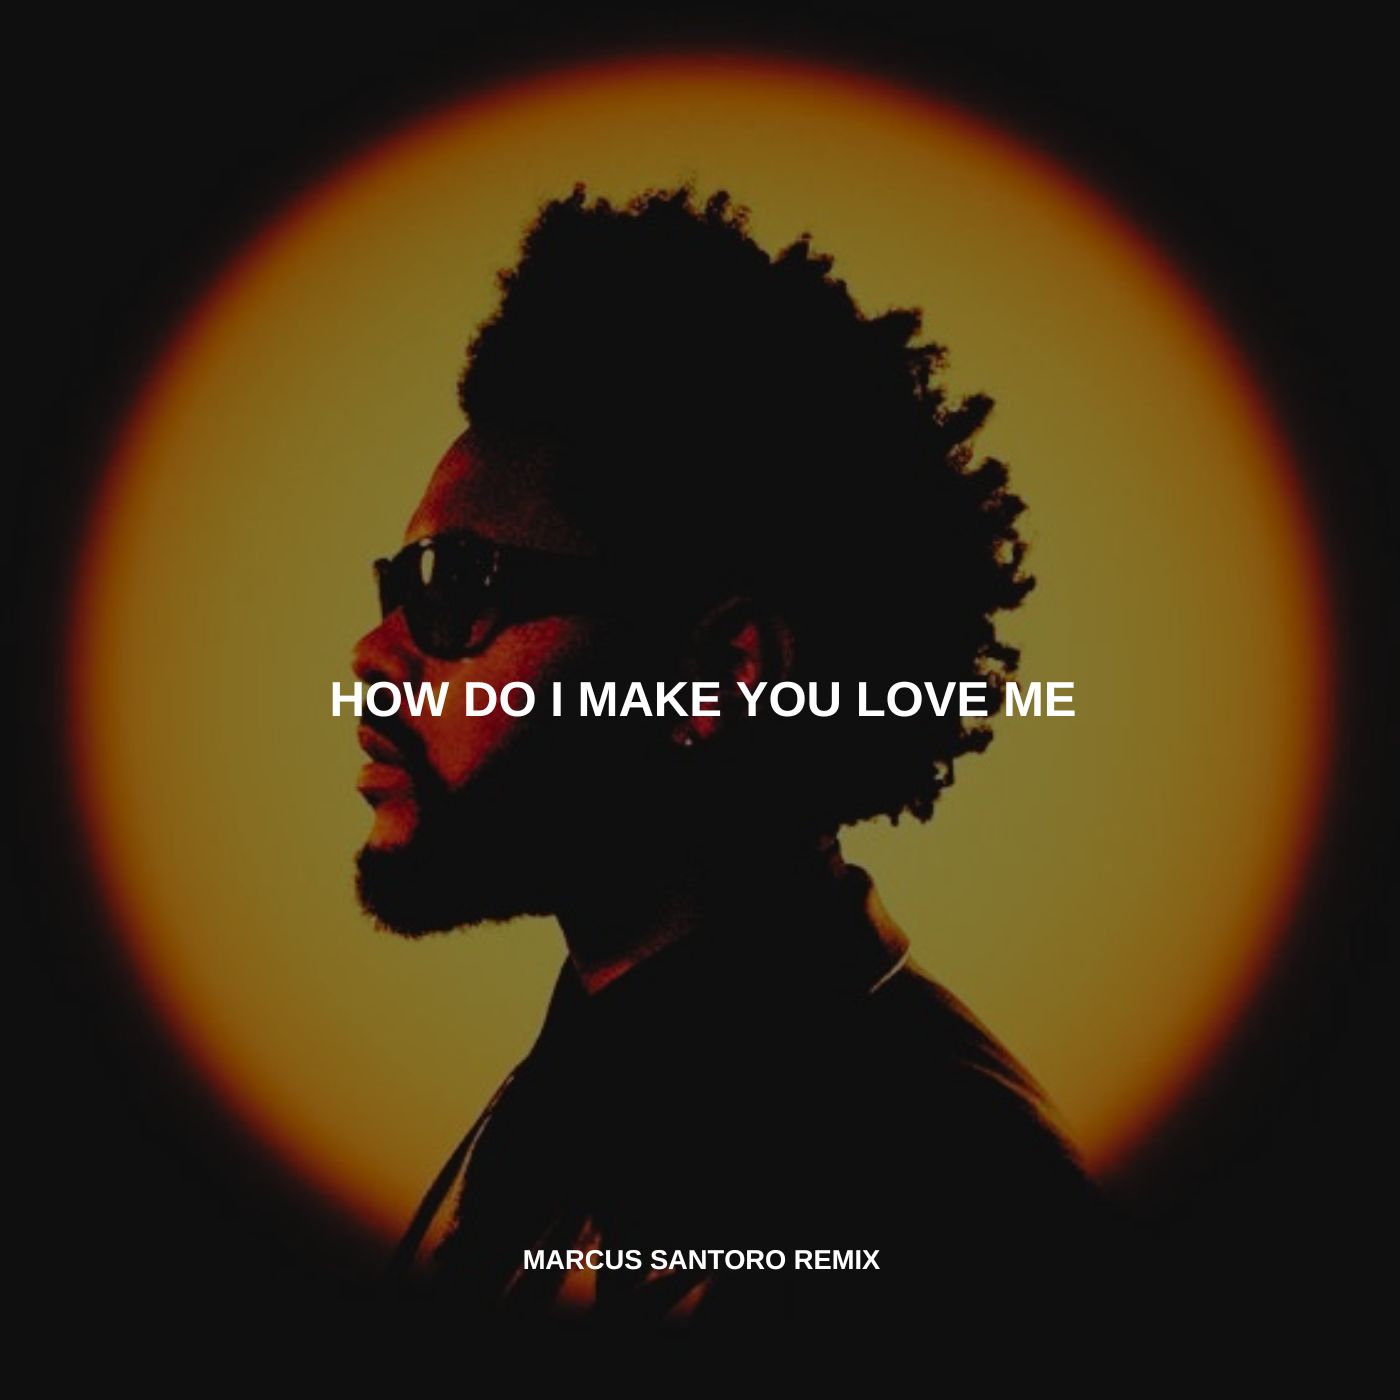 Télécharger The Weeknd - How Do I Make You Love Me (Marcus Santoro Remix) // FREE DOWNLOAD